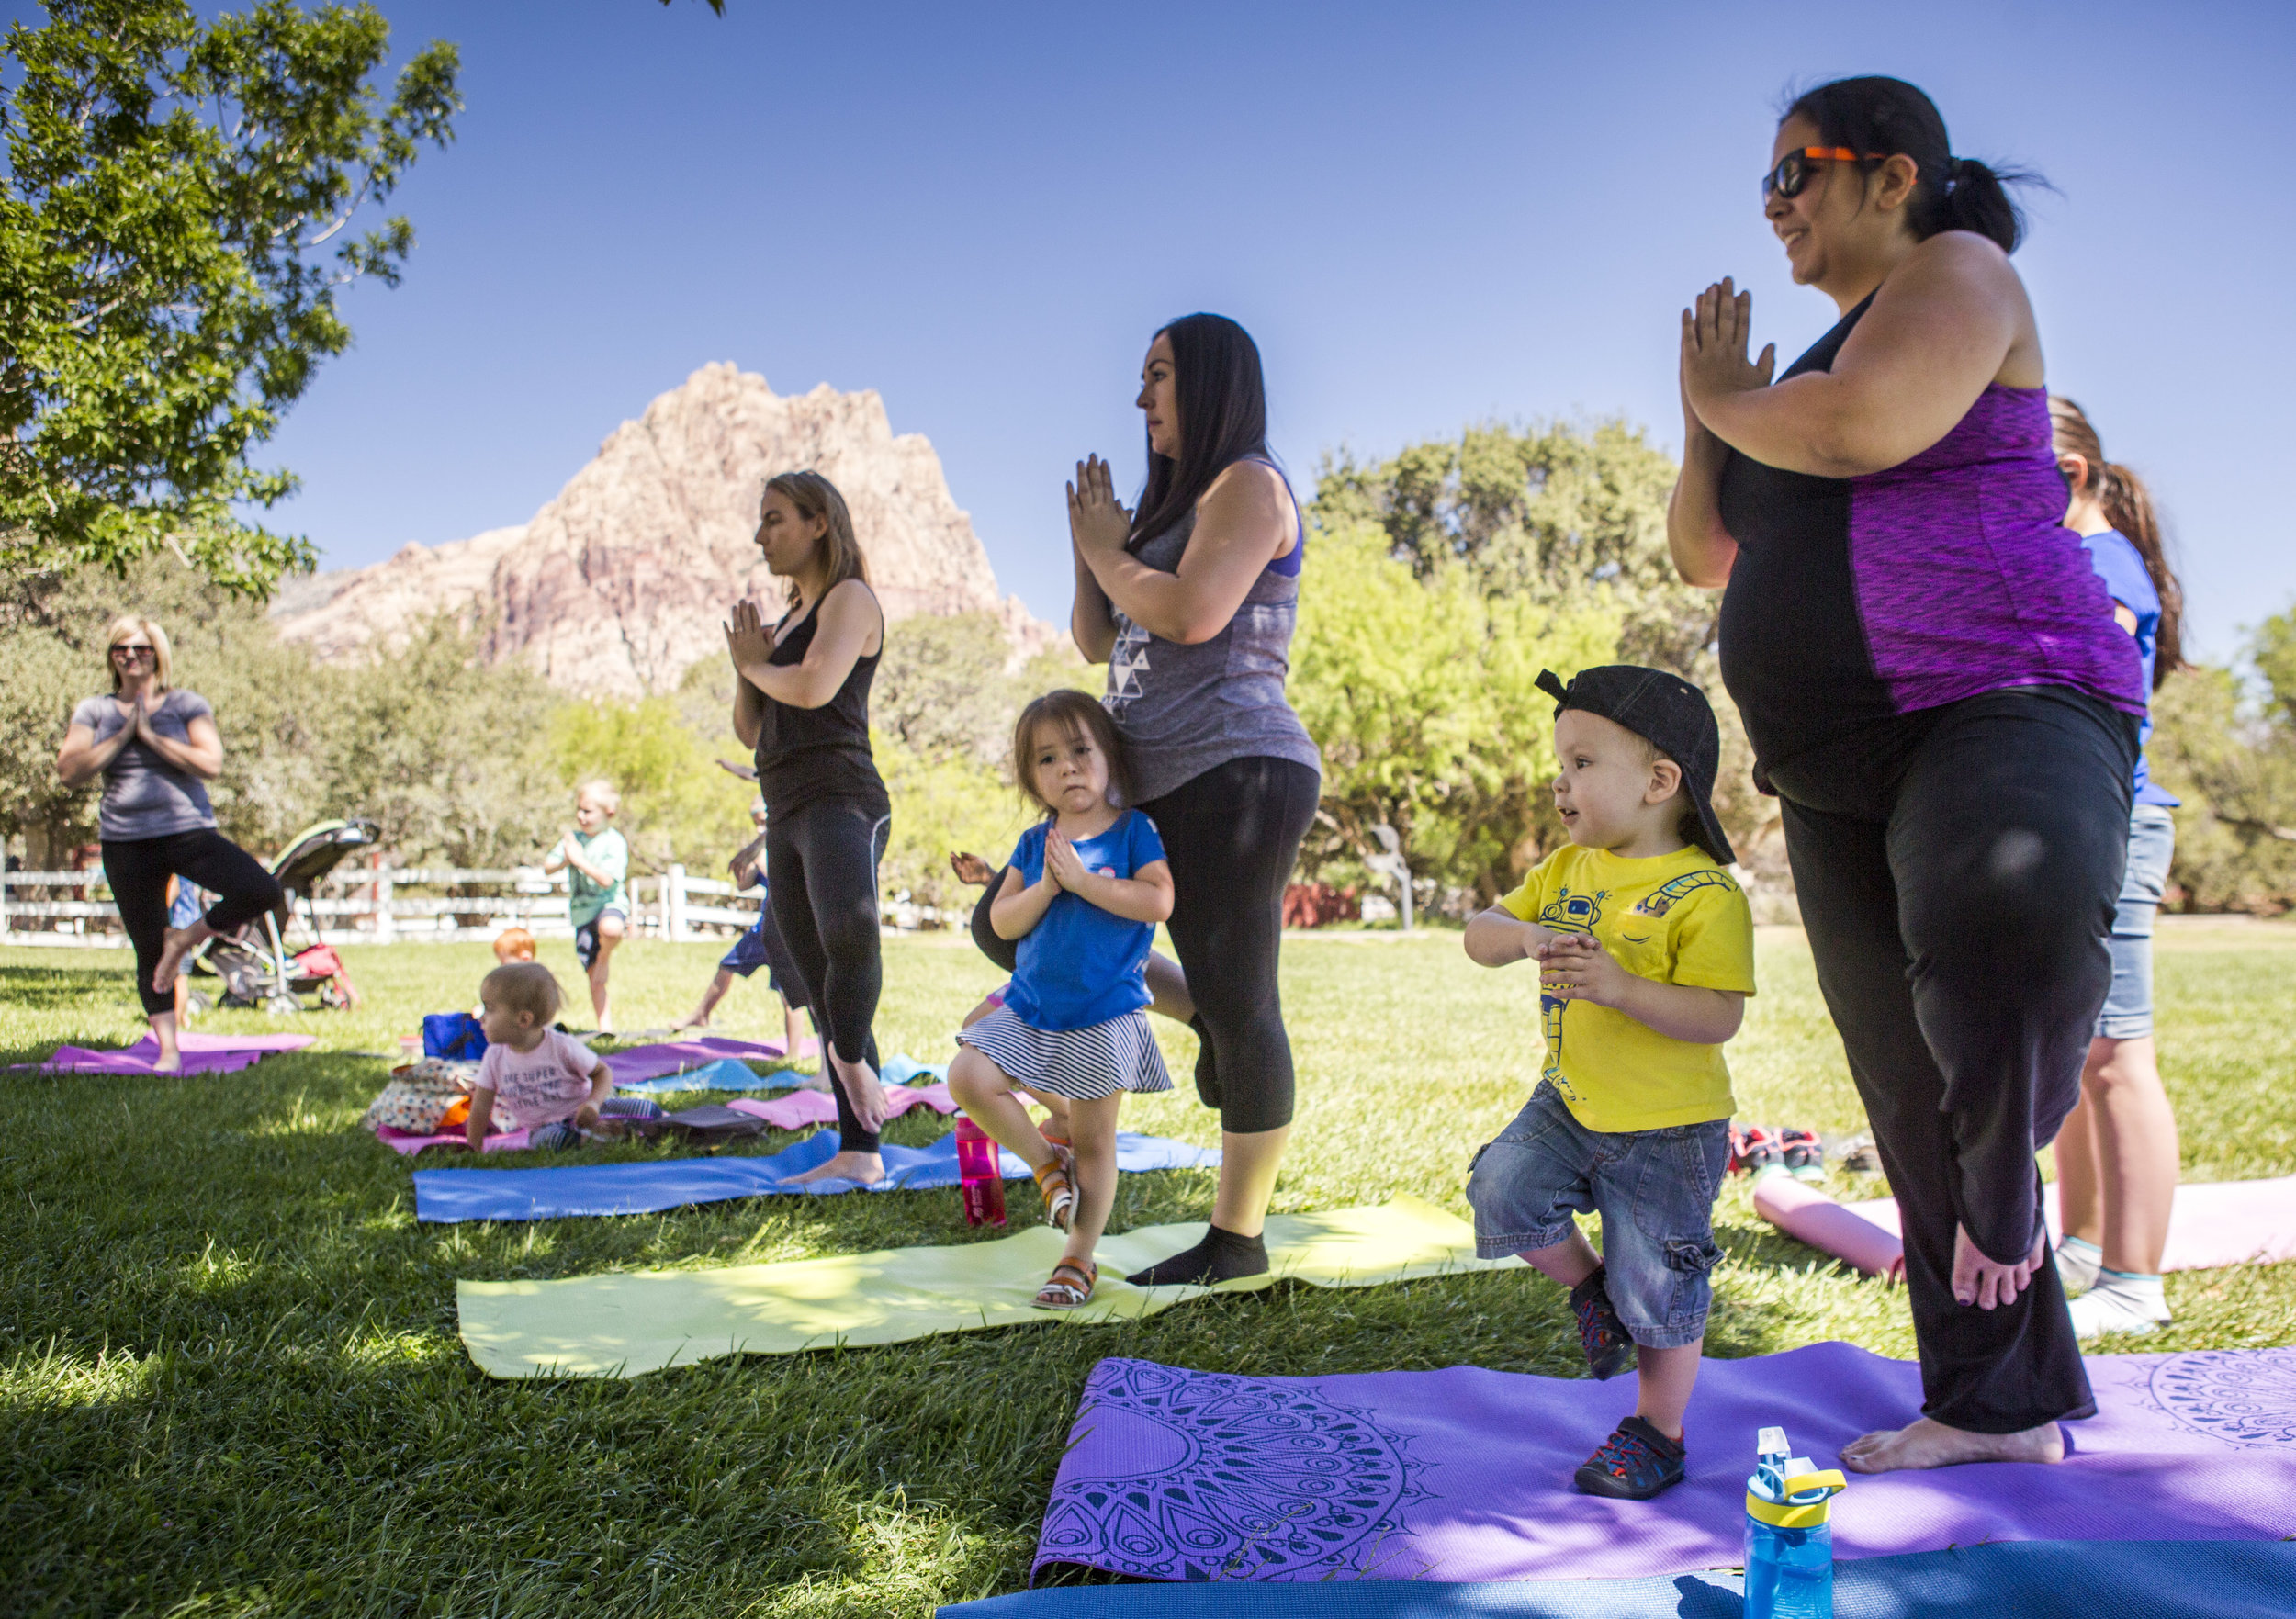  Ajelica and Vincent Wolf, right, Ana and Amaya Lazzarotto, middle, and Mary and James Grundstedt, center left, all practice a pose during a family yoga class at Spring Mountain Ranch State Park on Wednesday, June 14, 2017.  Patrick Connolly Las Vega